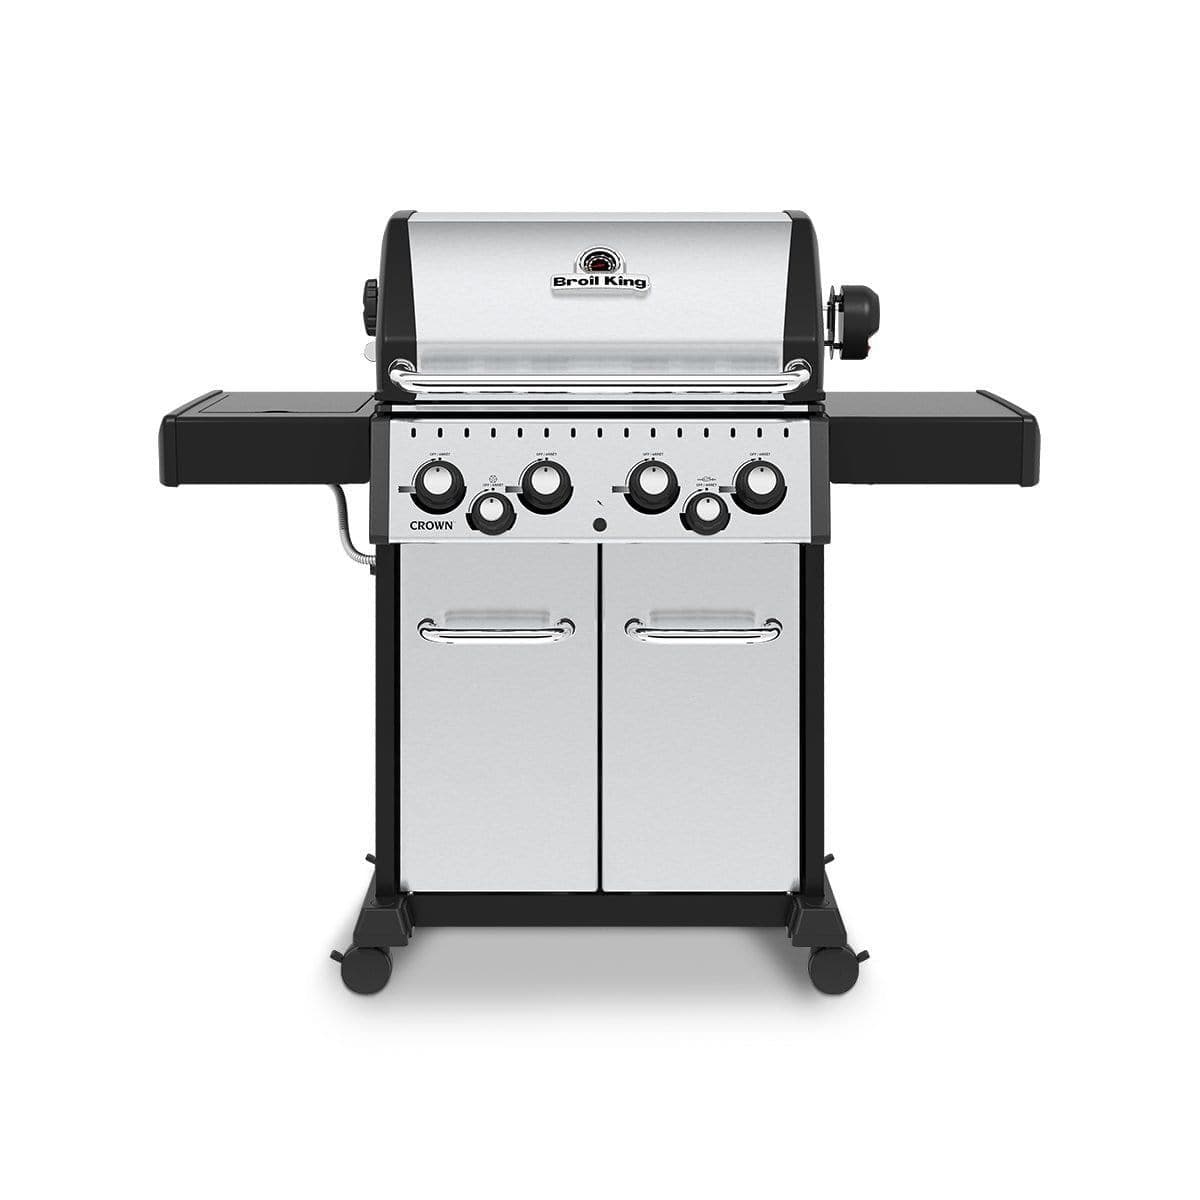 Broil King Freestanding Grill Propane Broil King CRN-S490 Crown S490 Stainless Steel 4-Burner Gas Grill with Rotisserie and Side Burner, 57-Inches